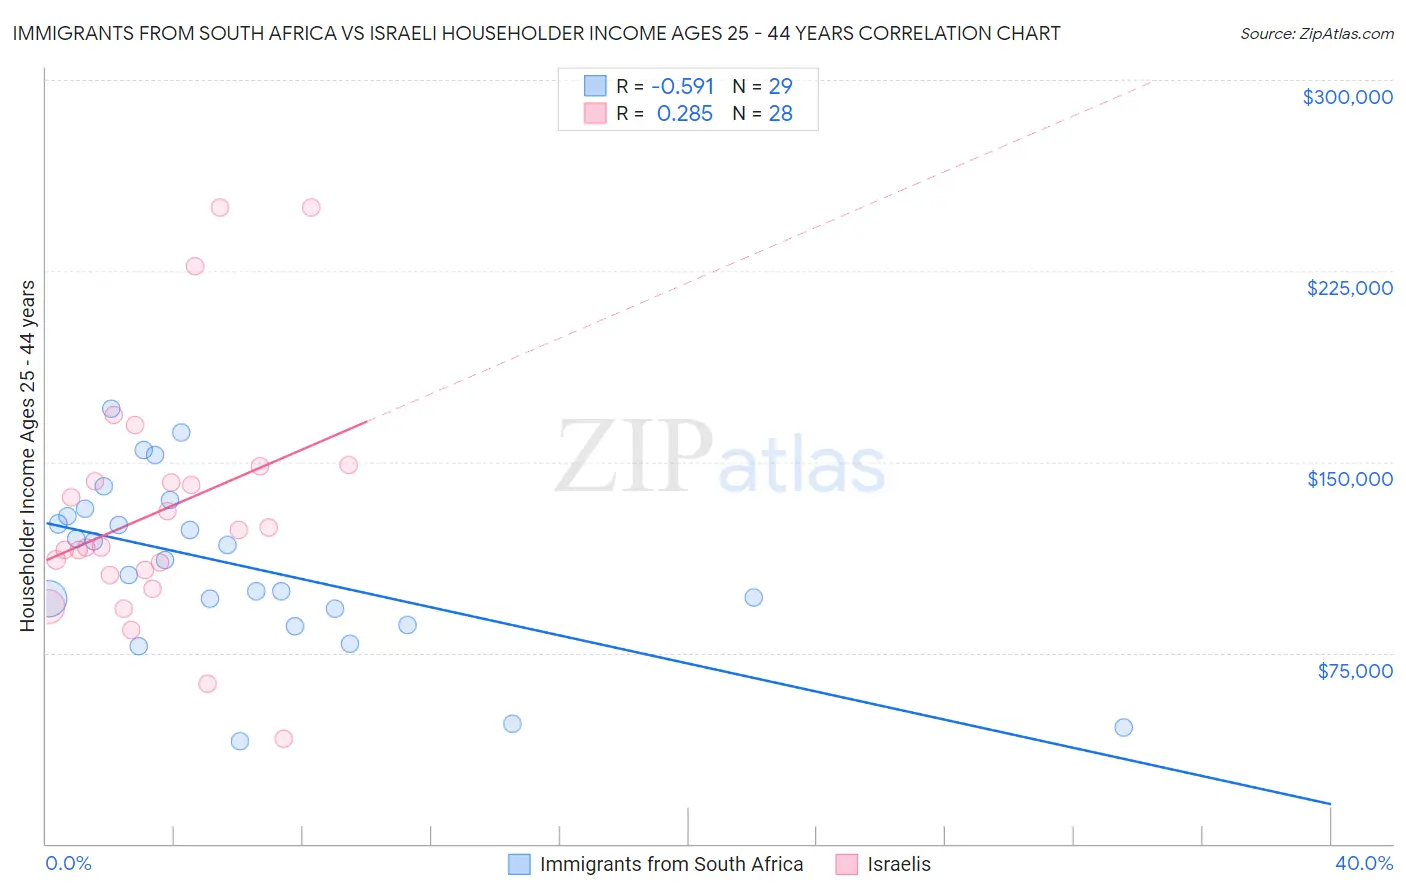 Immigrants from South Africa vs Israeli Householder Income Ages 25 - 44 years